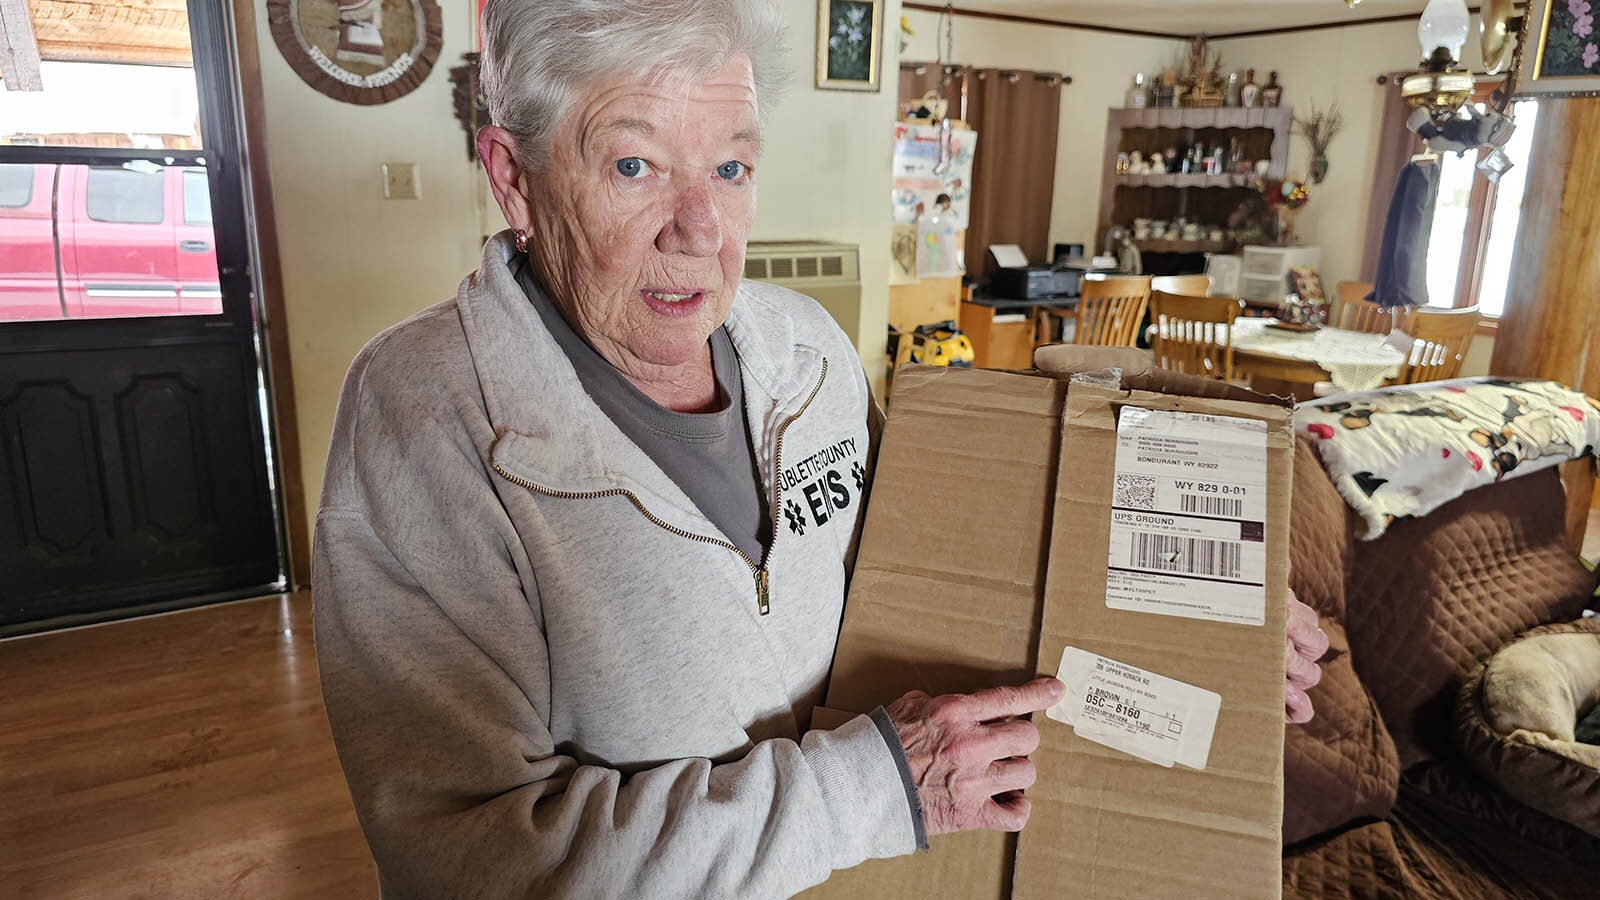 Pat Burroughs with one of the packages she recently received that has "Little Jackson Hole" written on it.